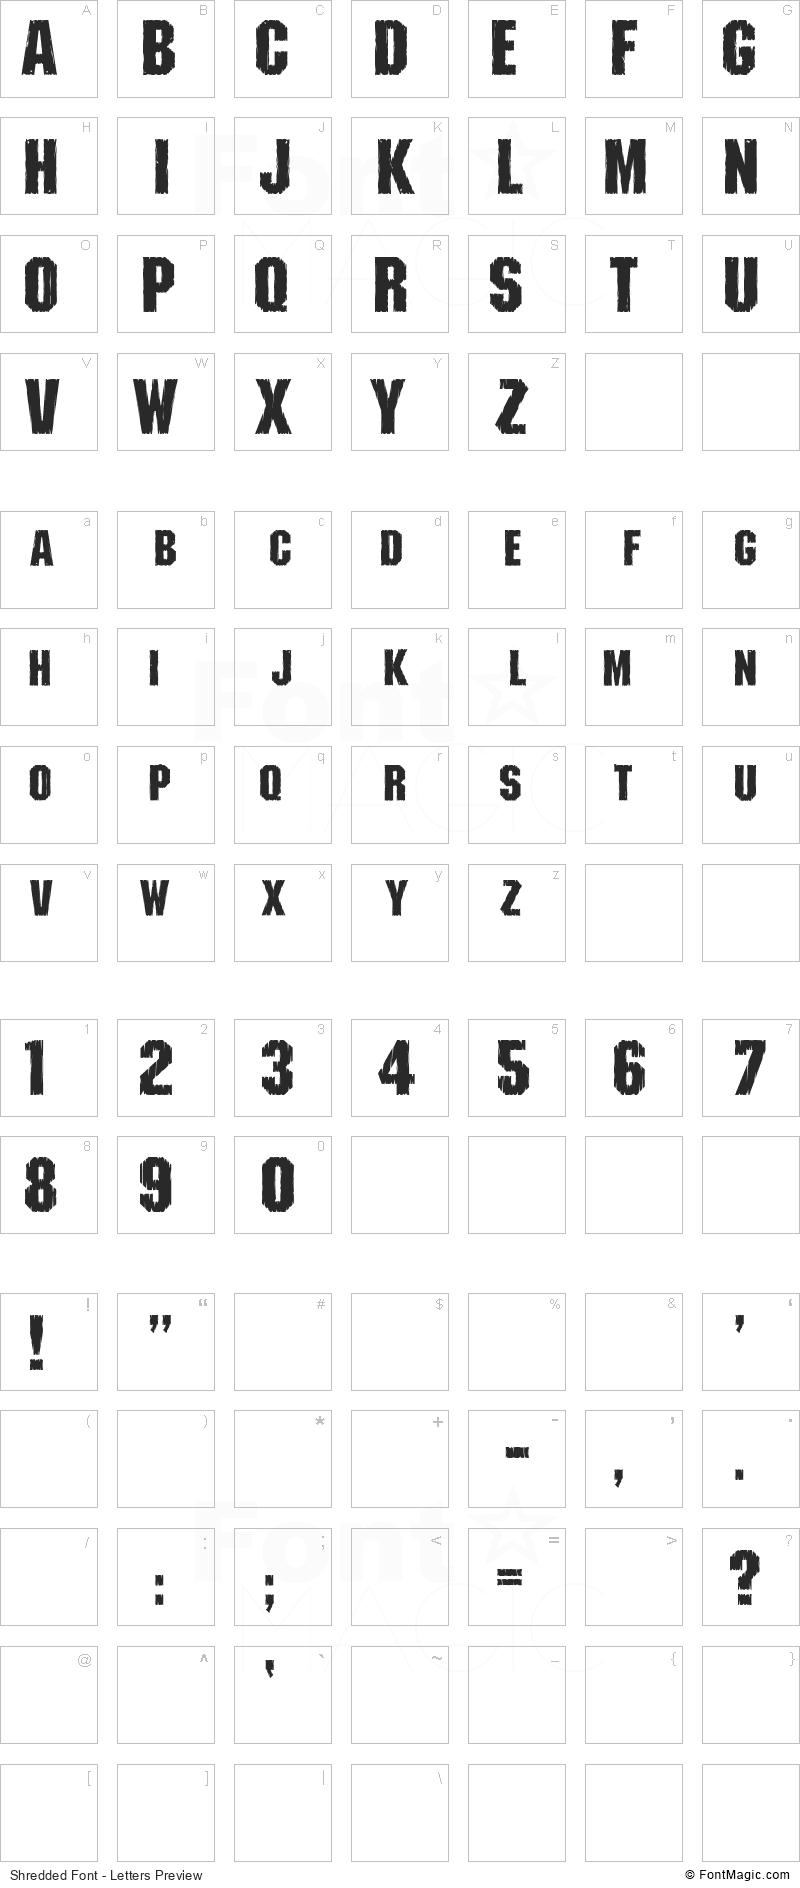 Shredded Font - All Latters Preview Chart